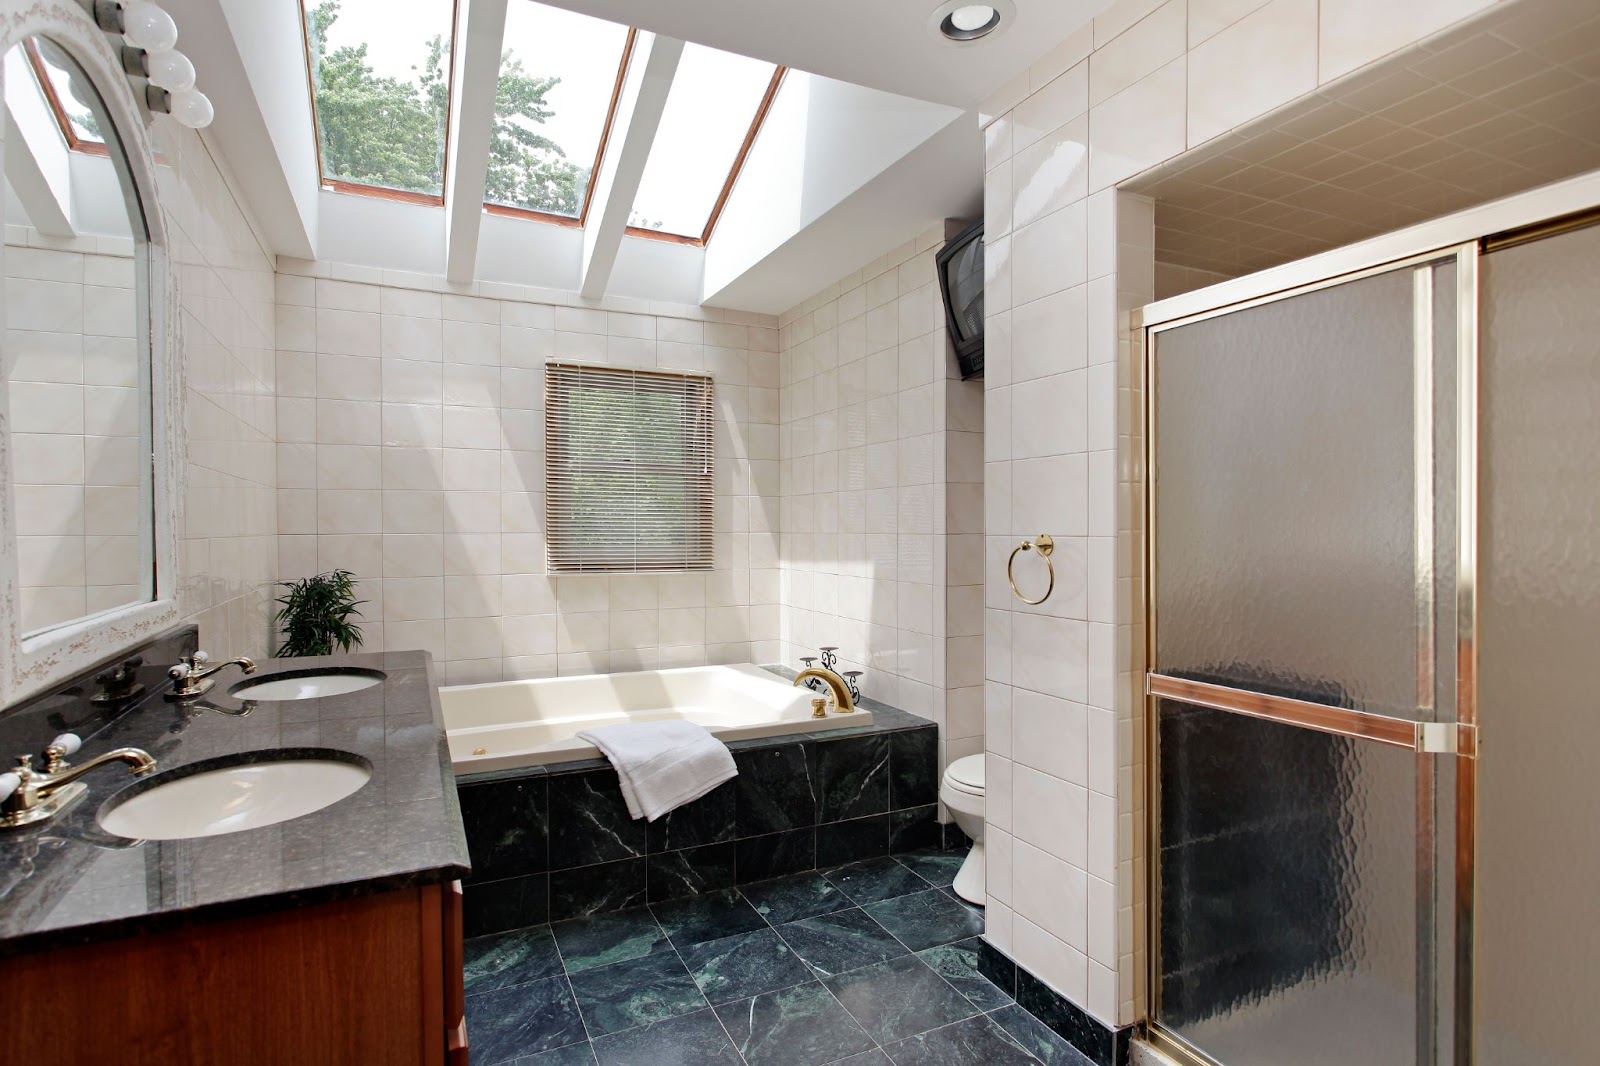 A luxurious bathroom featuring a skylight, bathtub, and floor-to-ceiling glass shower doors with a fancy glass design